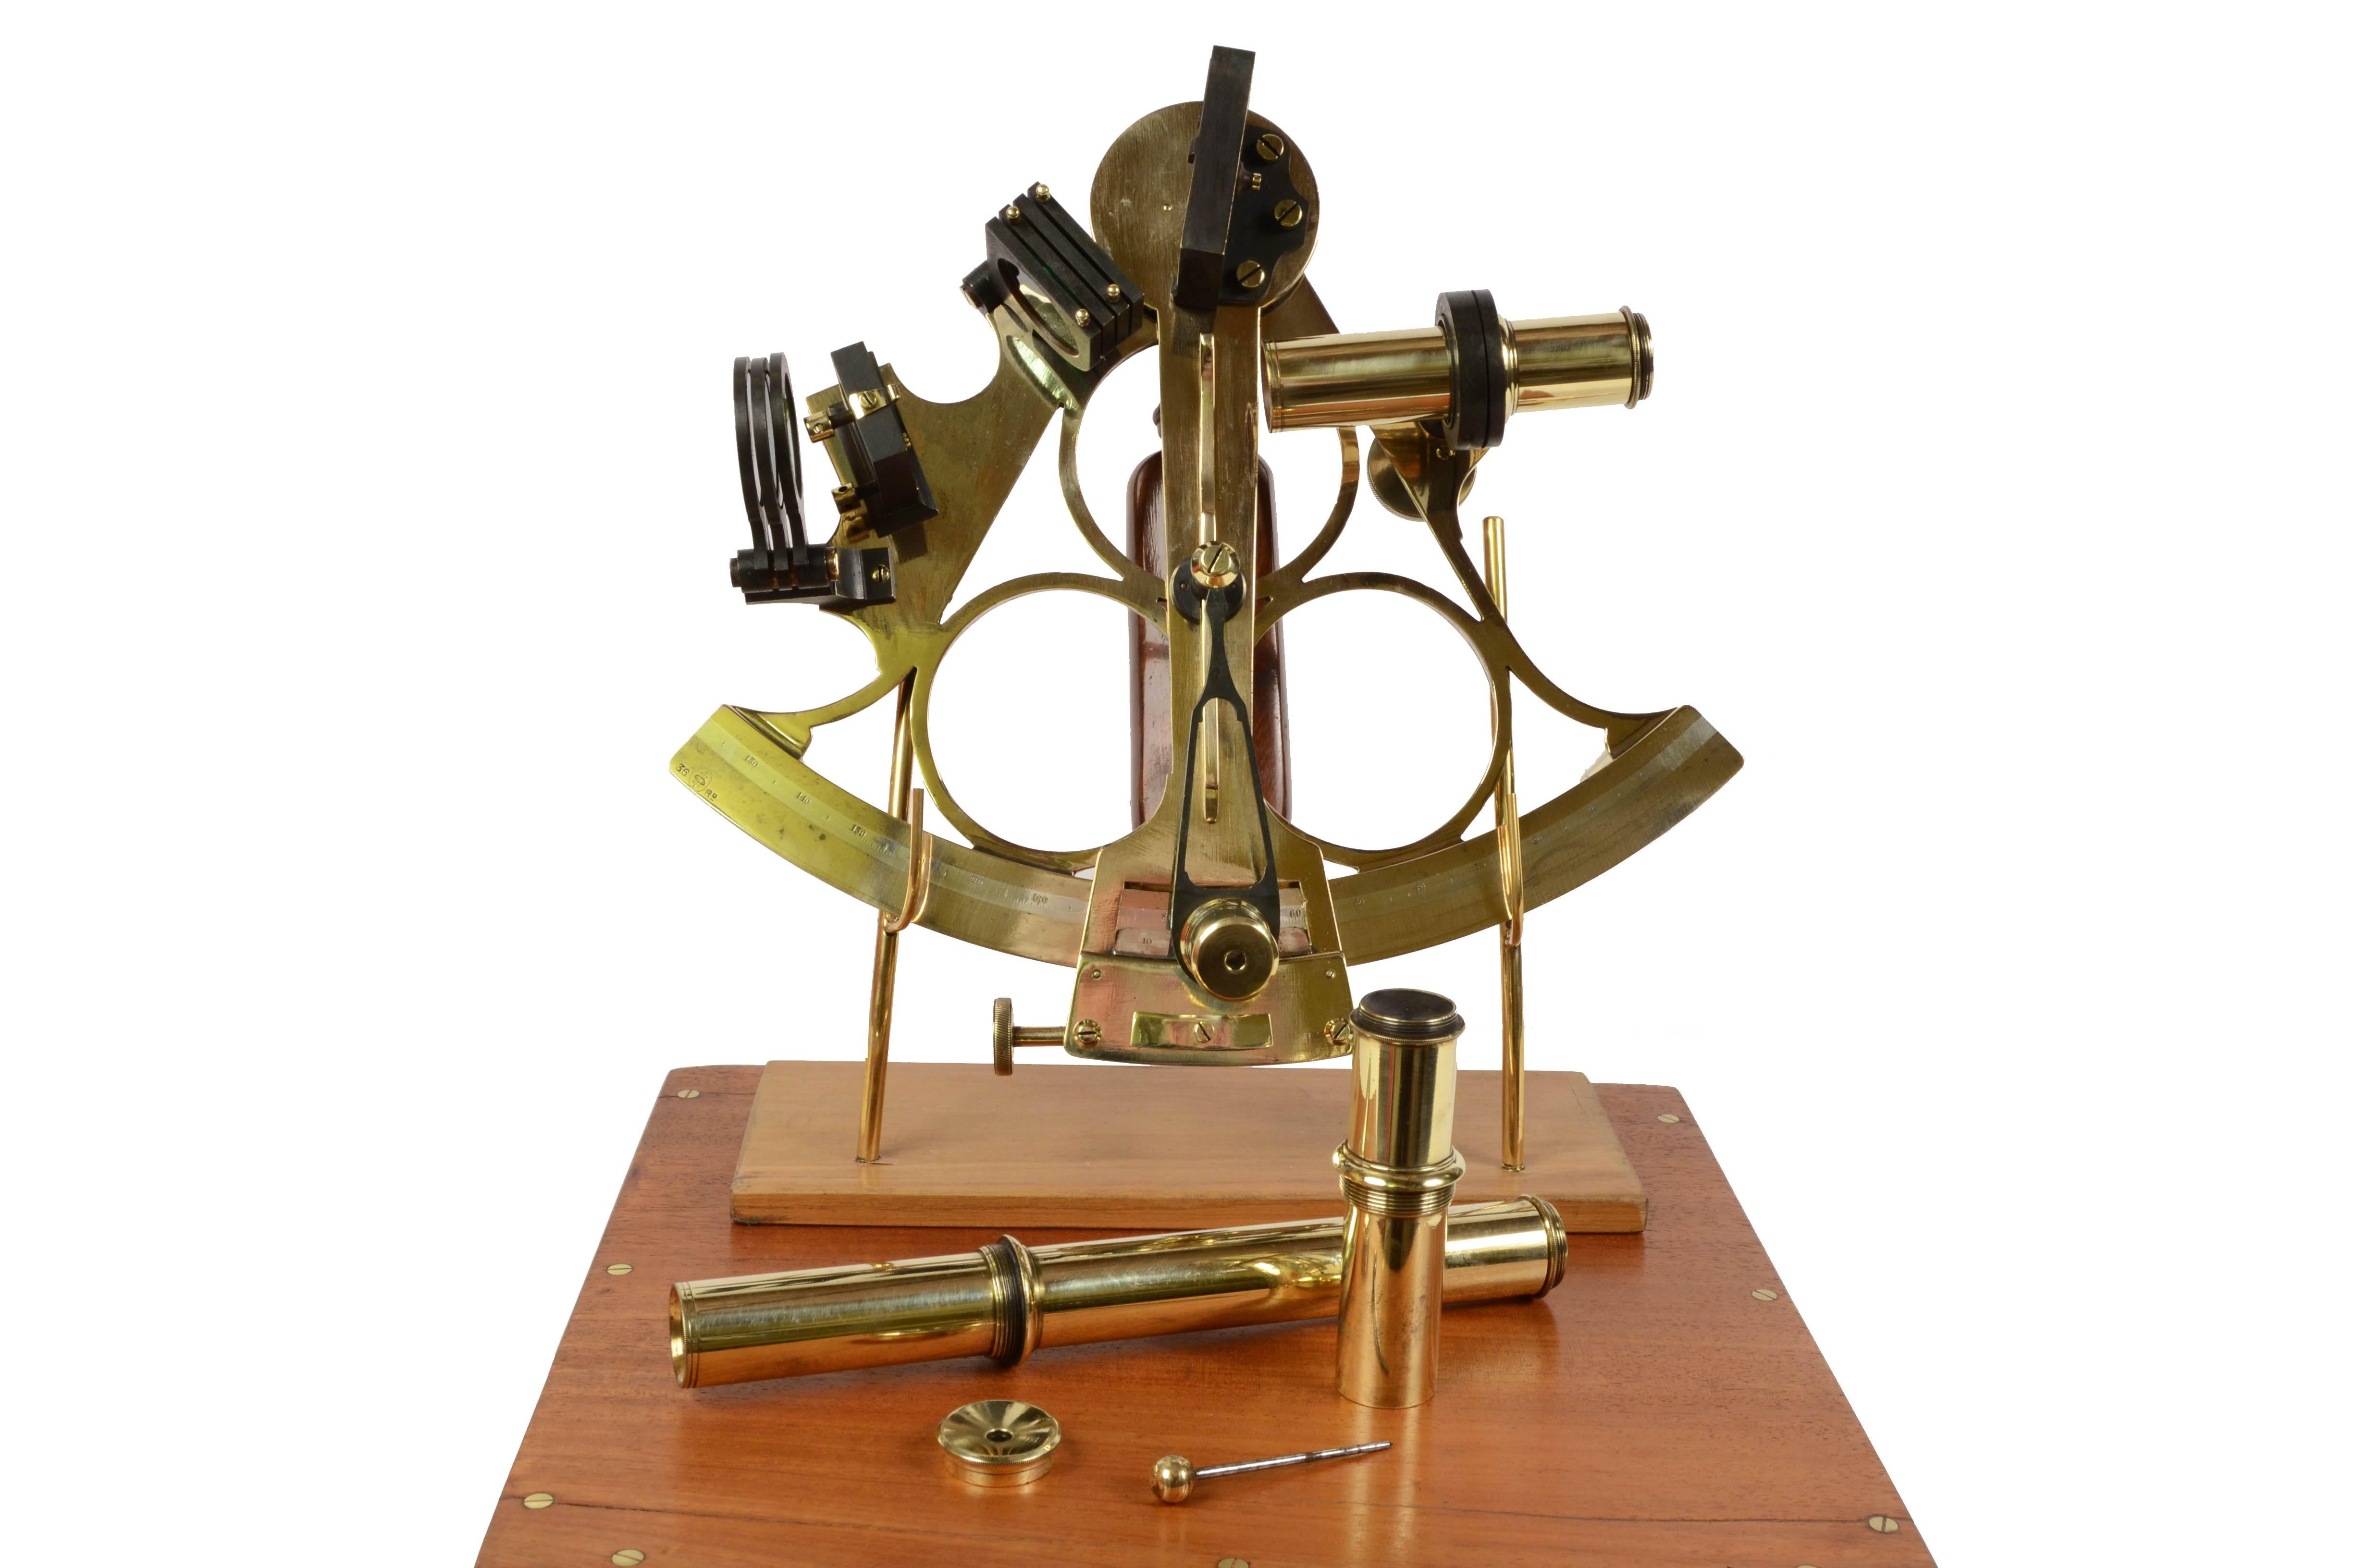 Mid 19th century brass English sextant signed Marshall London, instrument complete with three telescopes, one of which is long, and a filter and it is in its original mahogany box with brass hinges, latches and handle. Brass frame with engraved